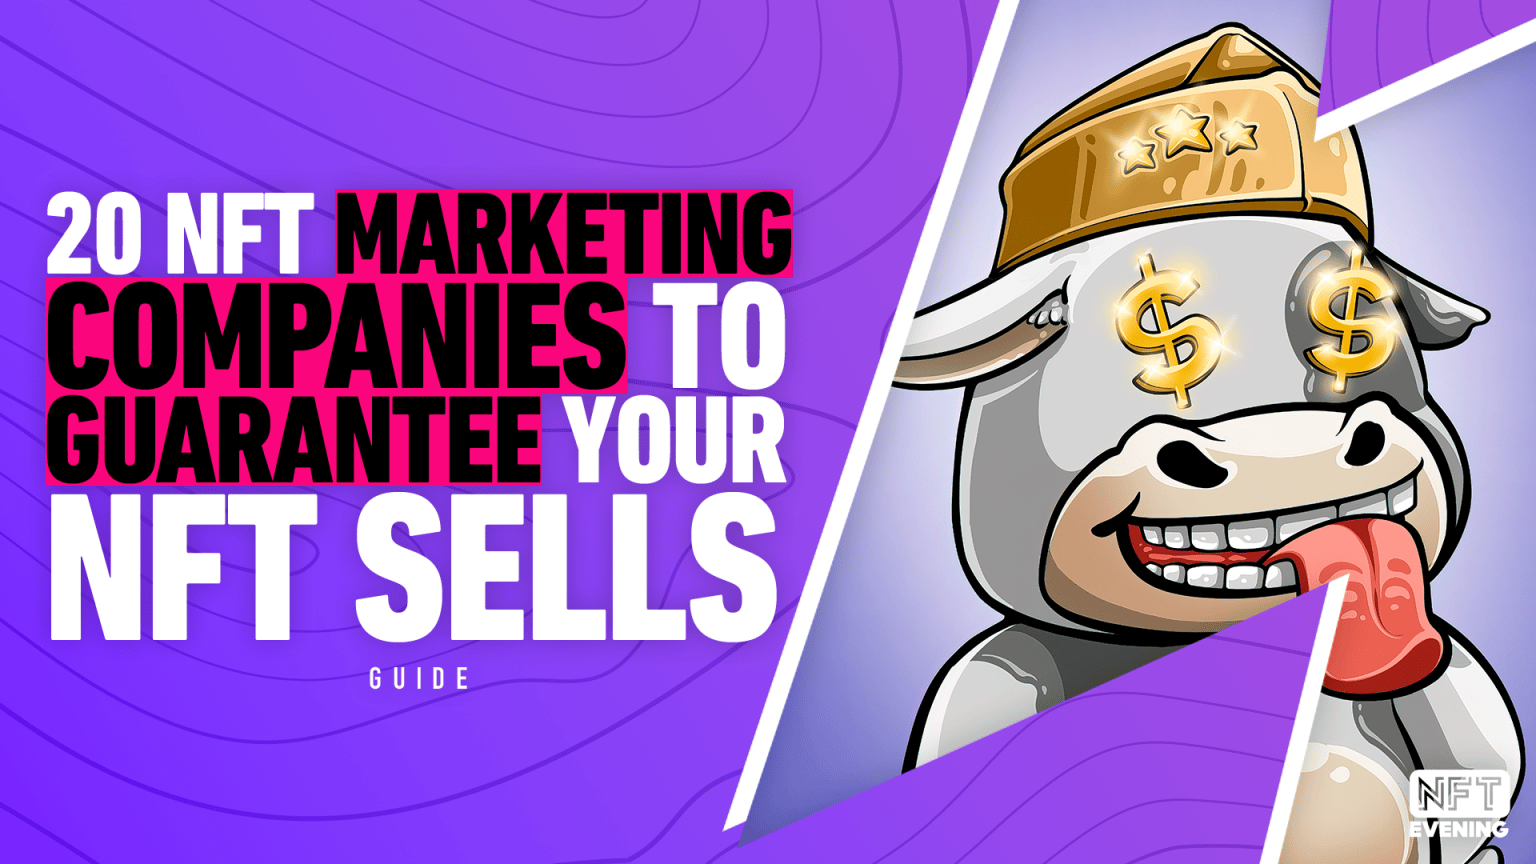 20 NFT Marketing Companies To Guarantee Your NFT Sells